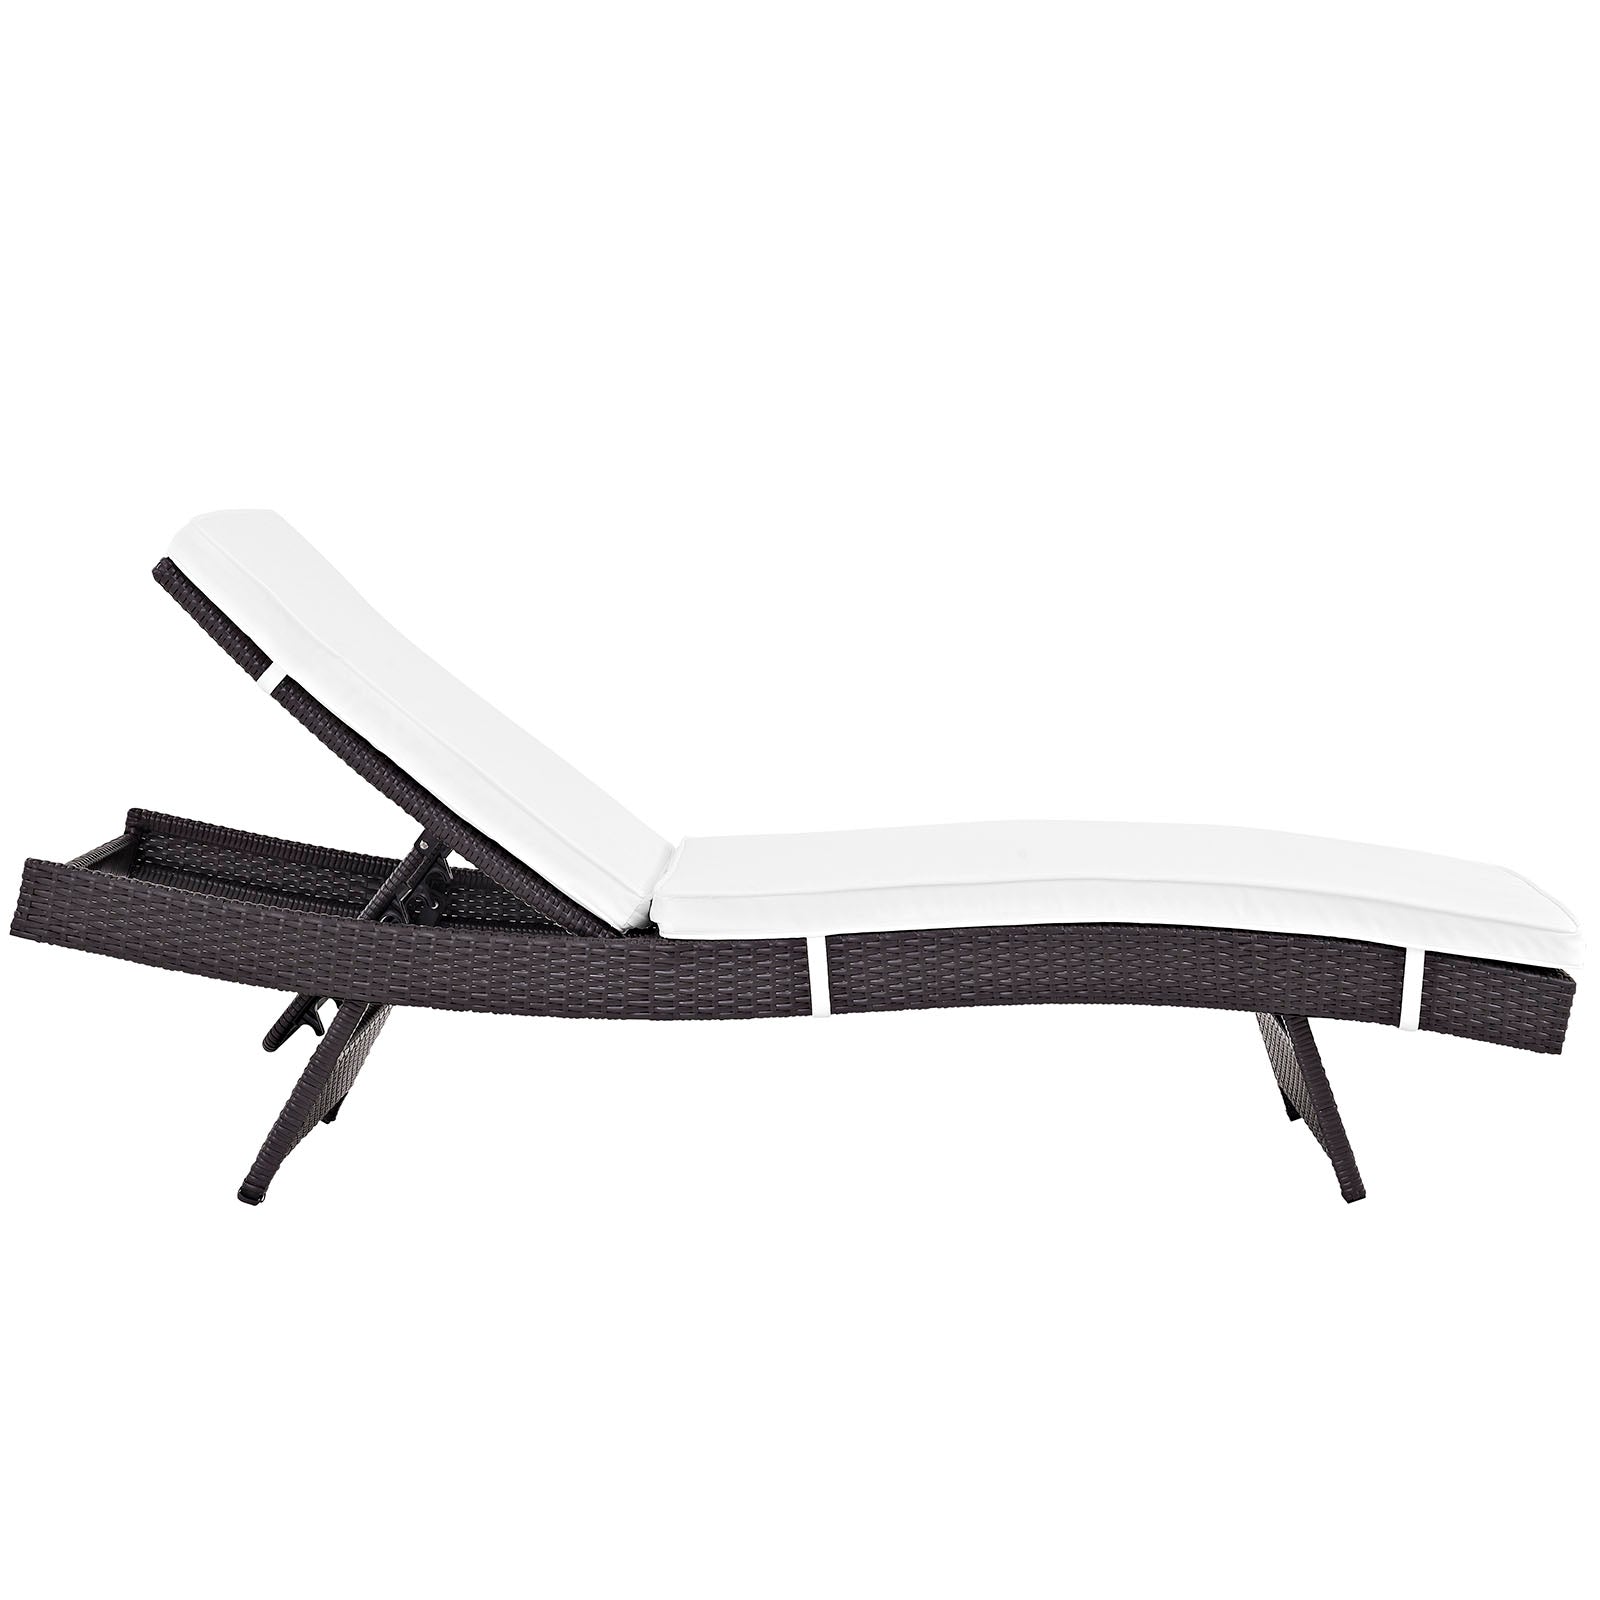 Convene Chaise Outdoor Patio Set of 6 - East Shore Modern Home Furnishings